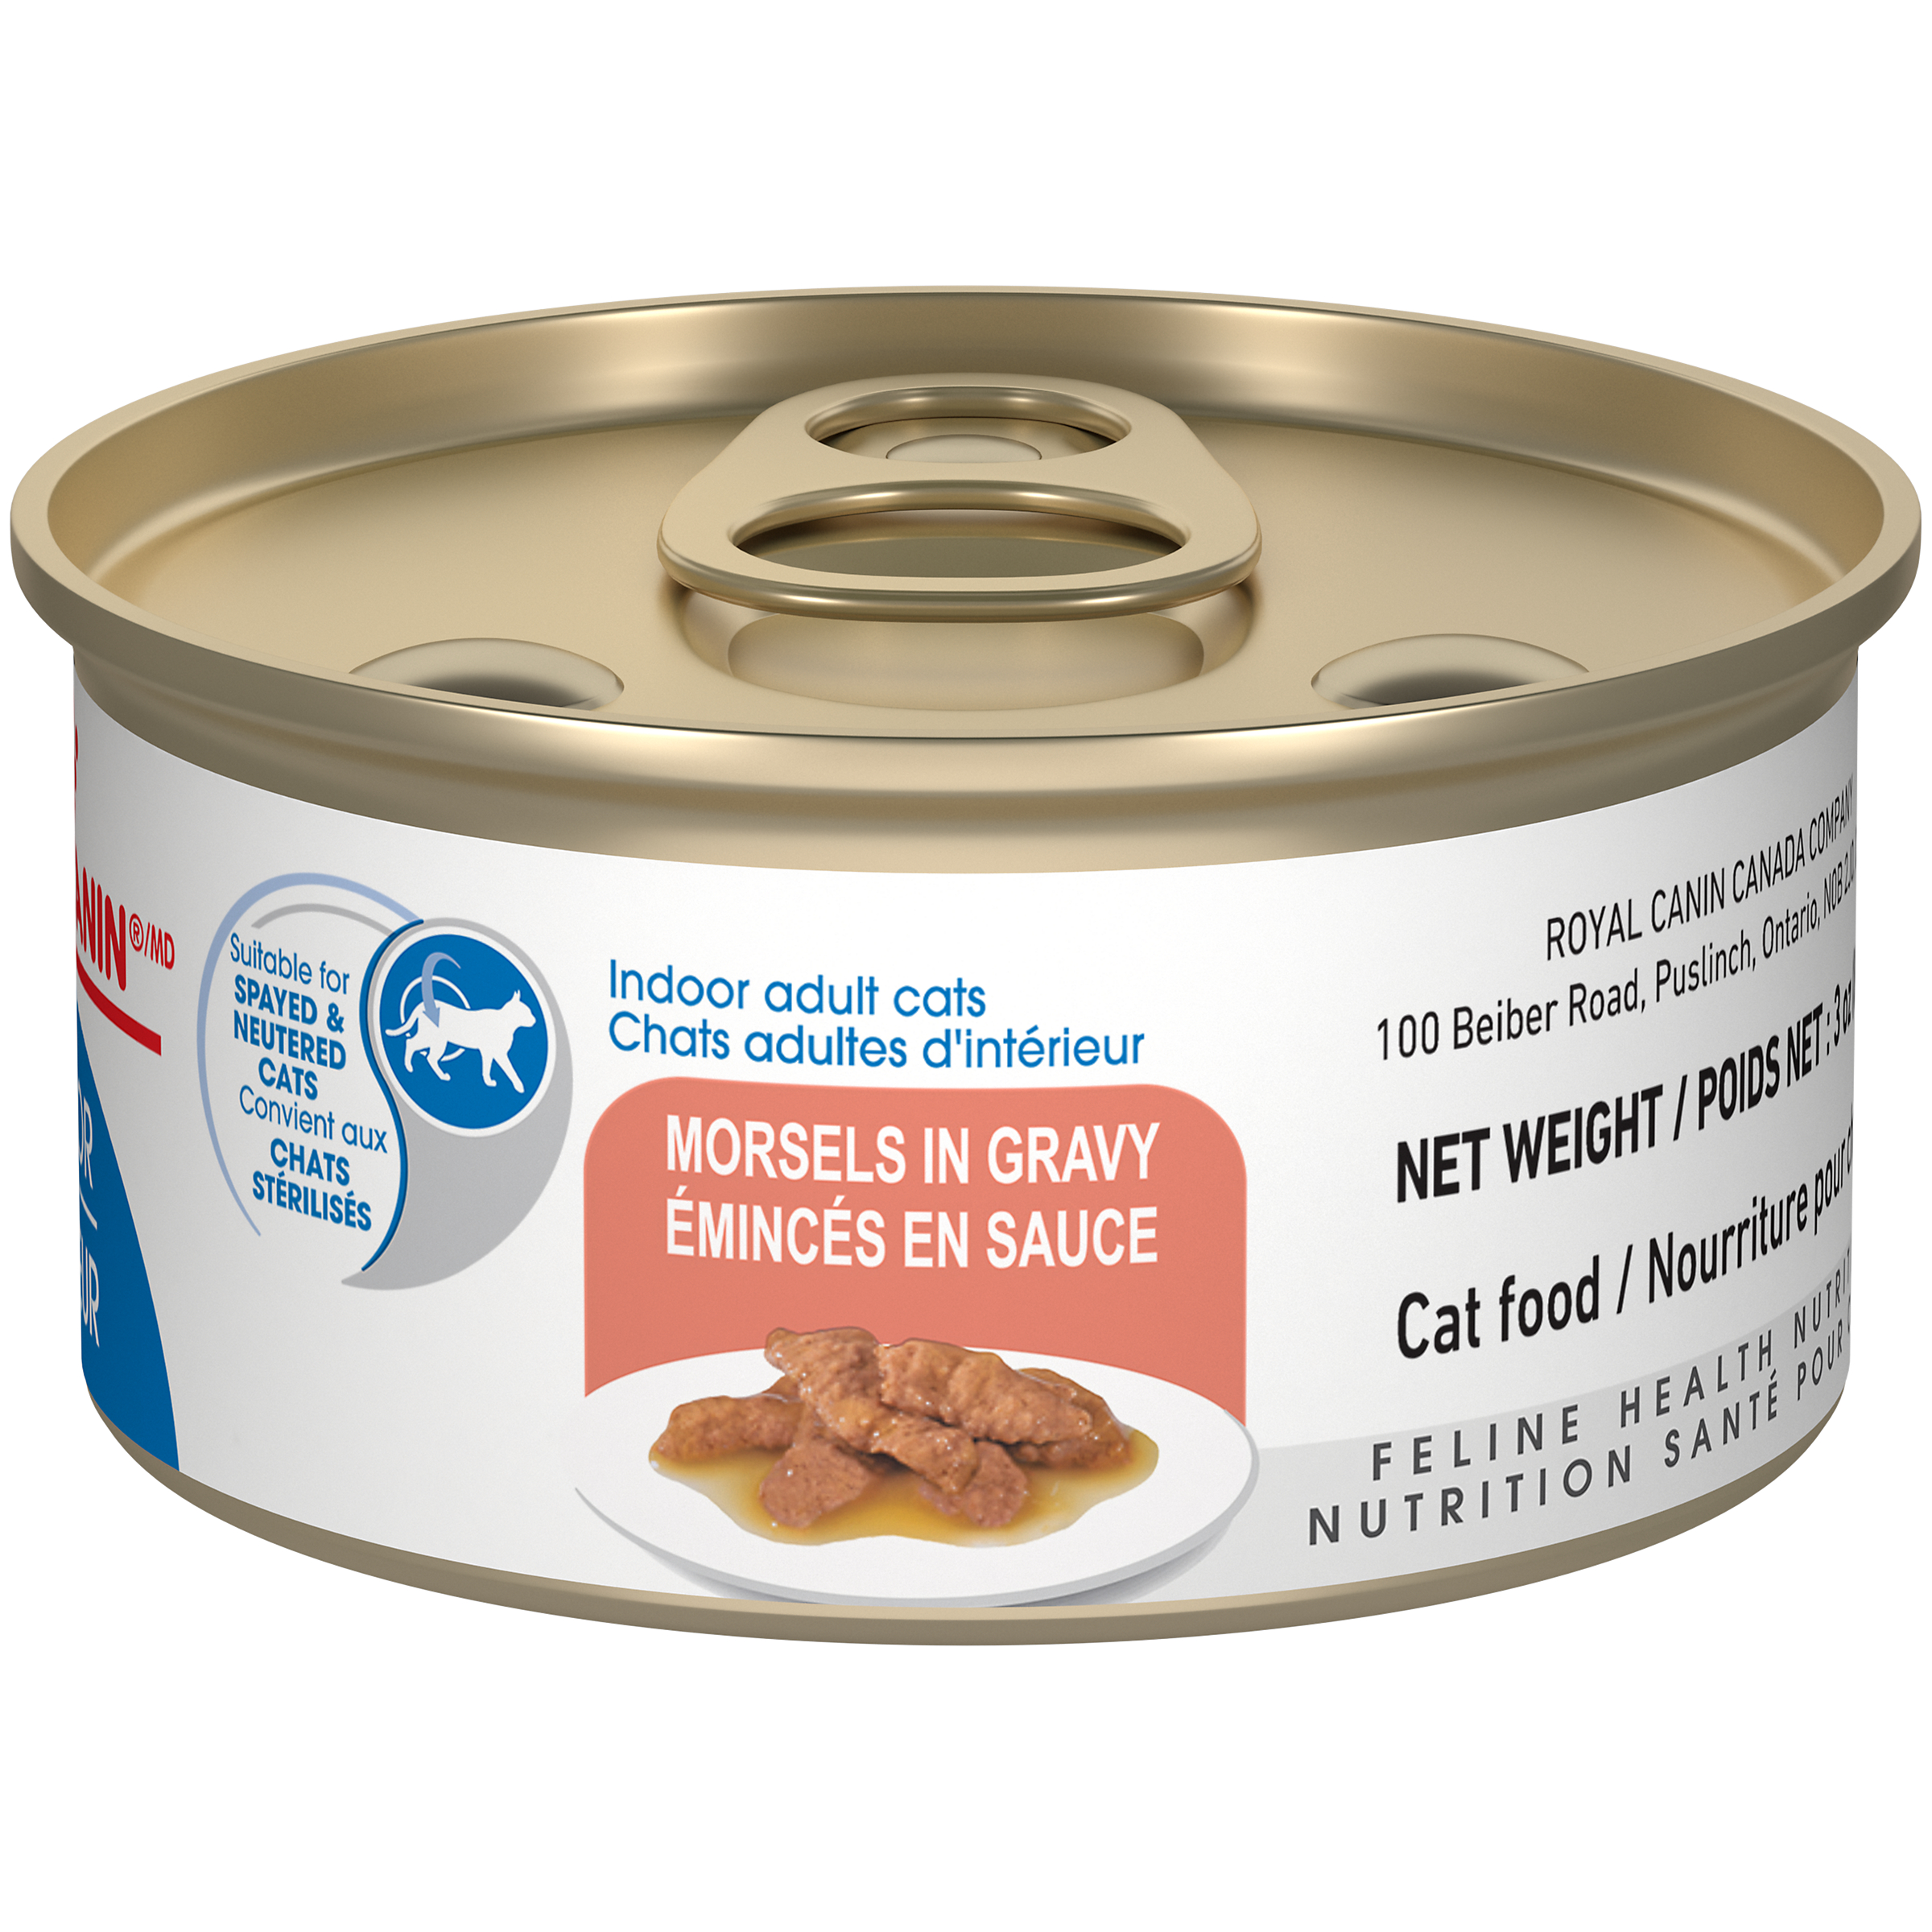 Indoor Adult Morsels in Gravy Canned Cat Food Royal Canin